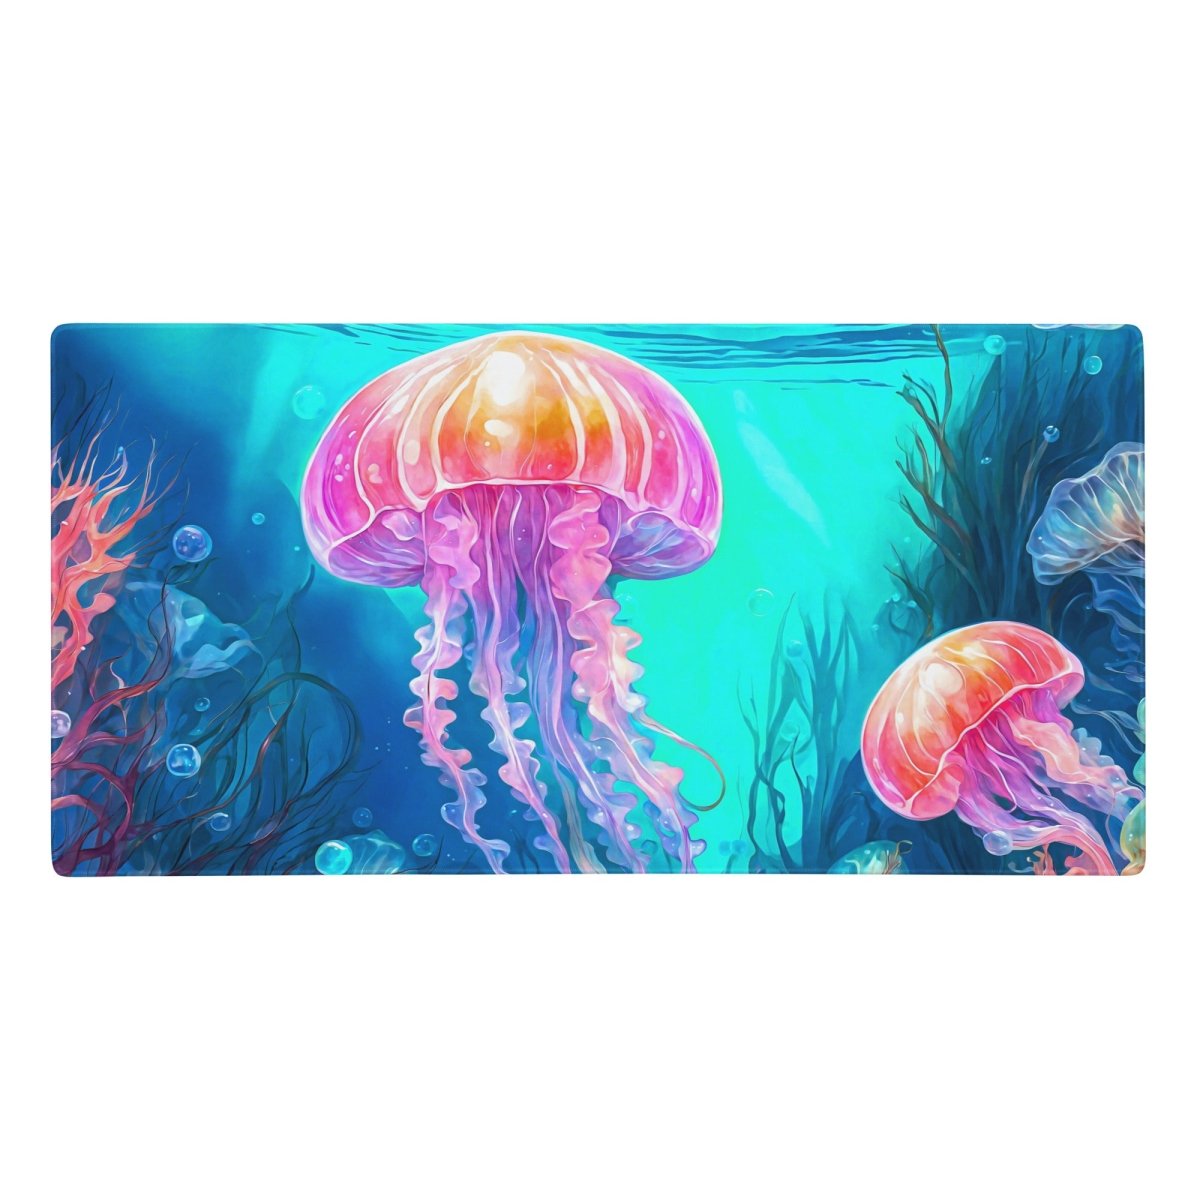 Jellyfish voyage - Gaming mouse pad - Ever colorful